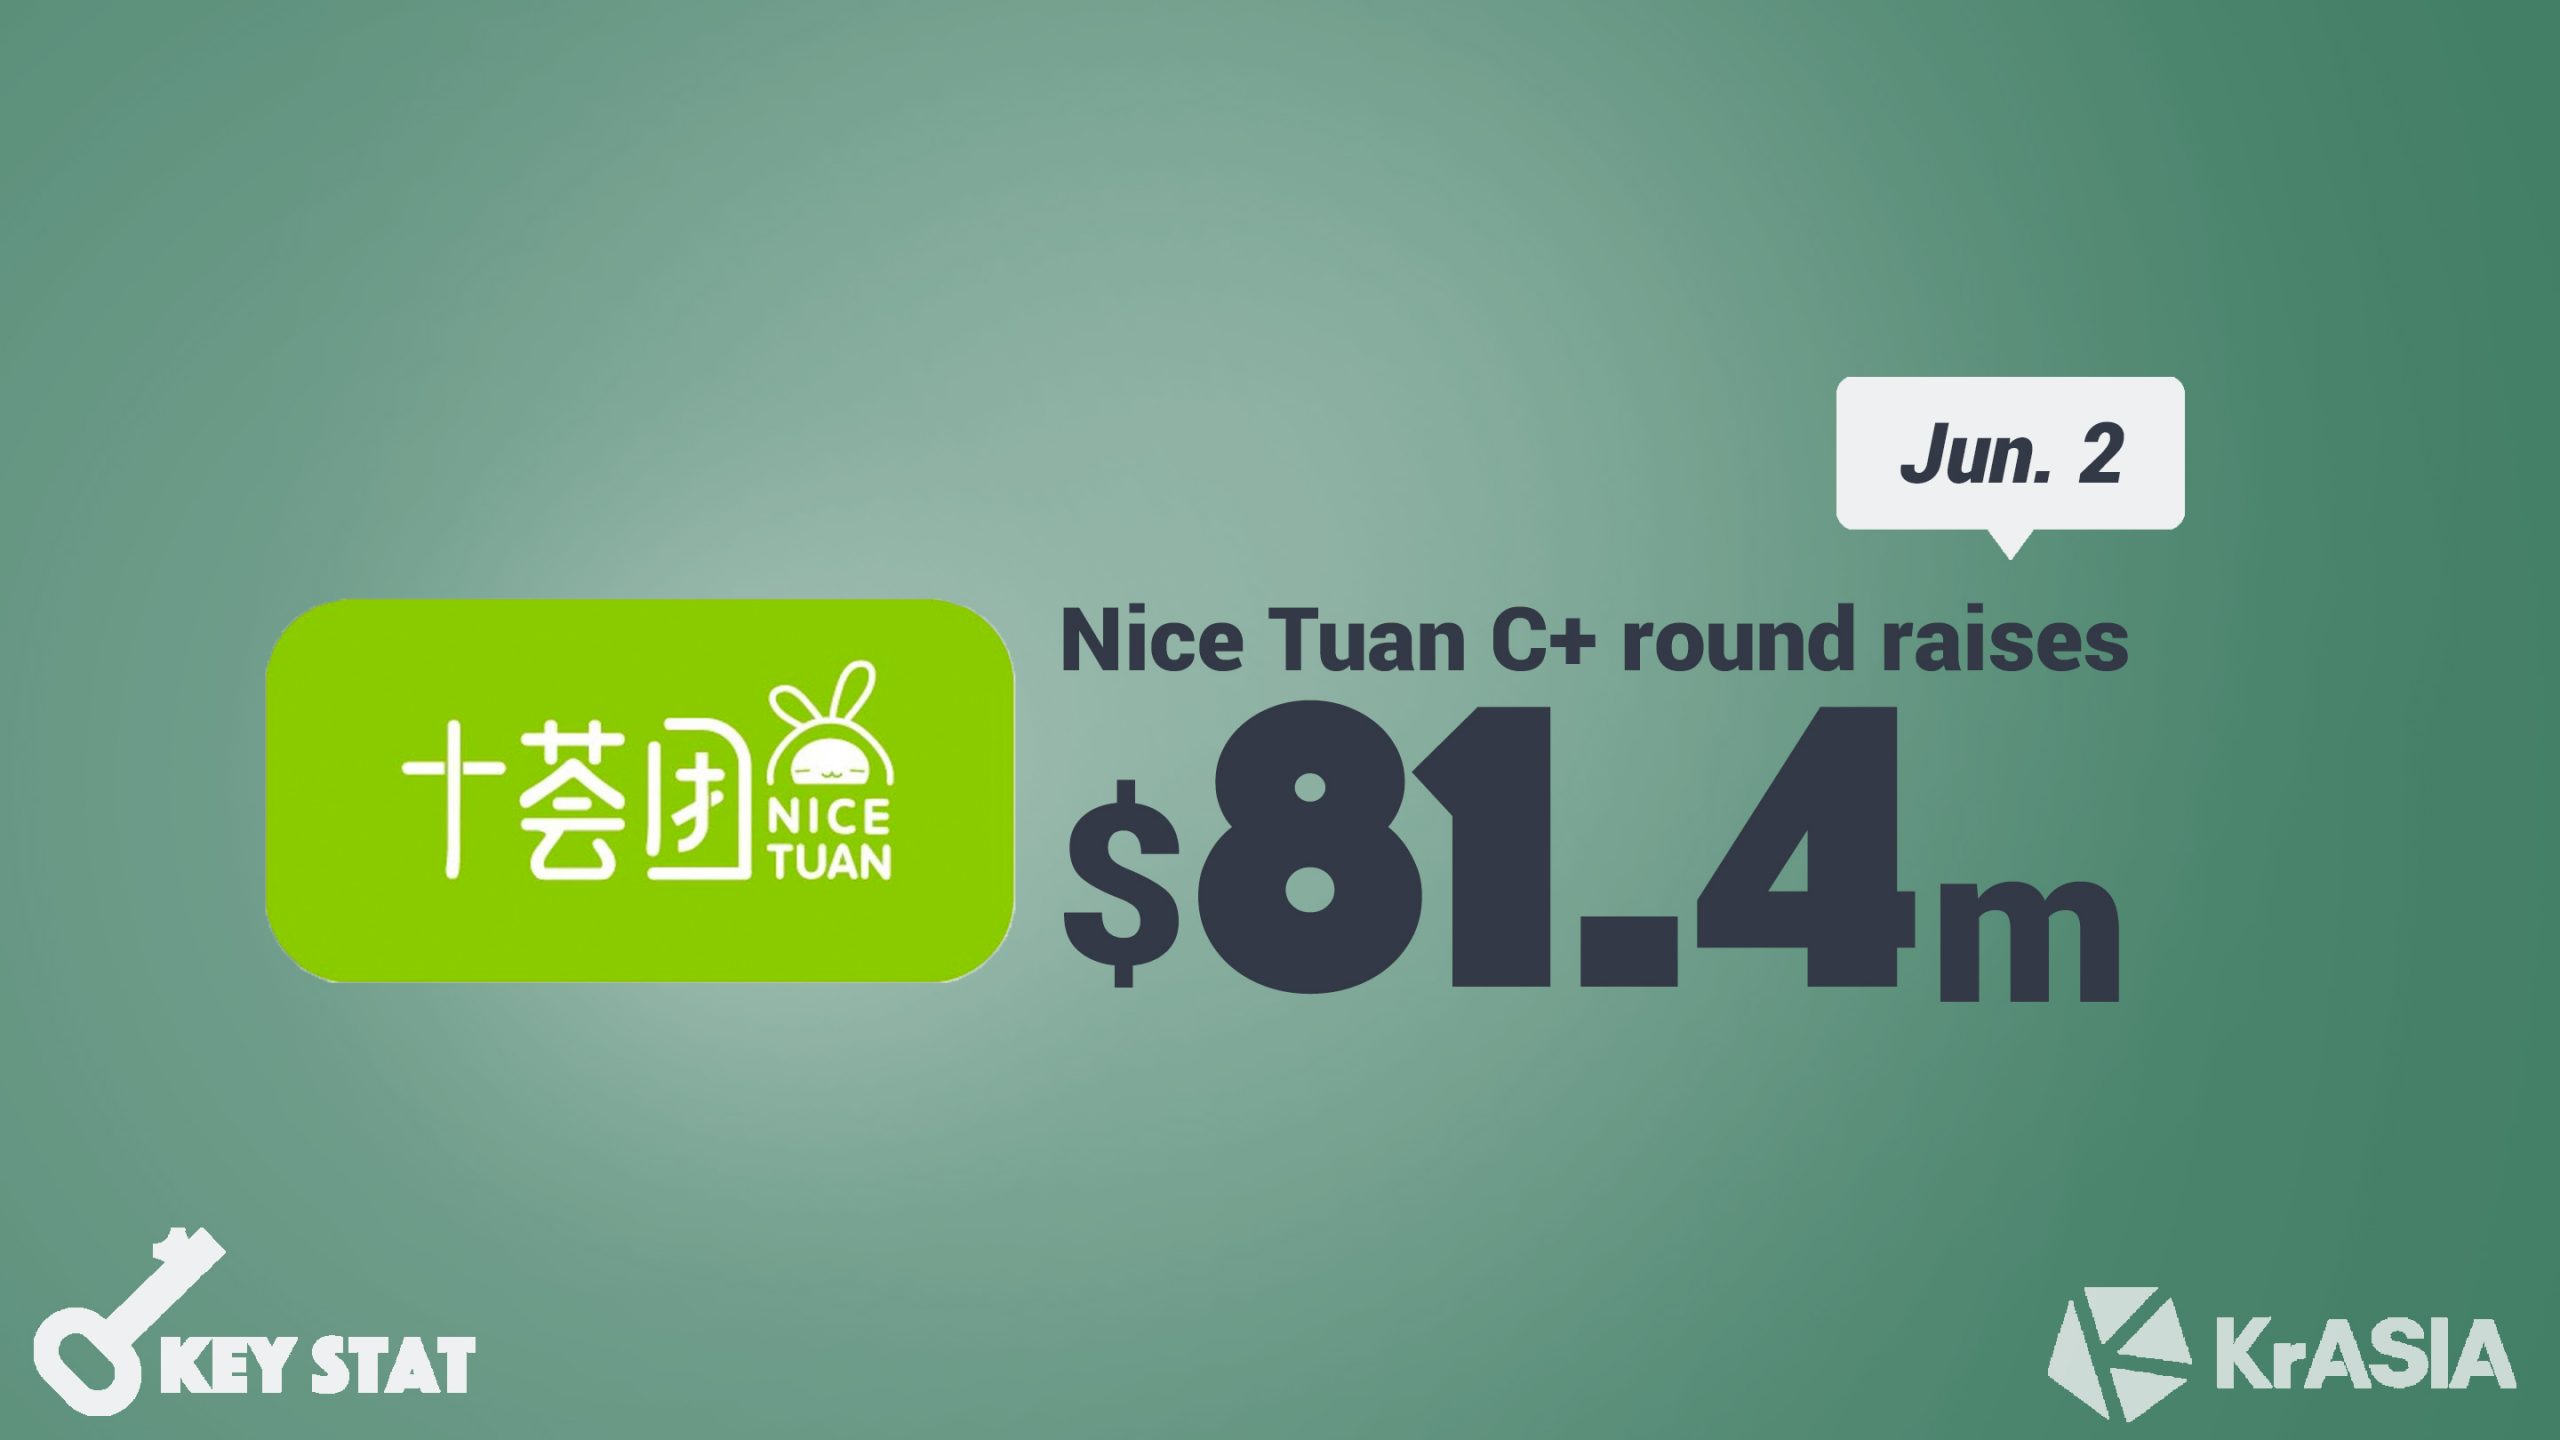 KEY STAT | Social and grocery e-commerce startup Nice Tuan closes round C+ fundraising